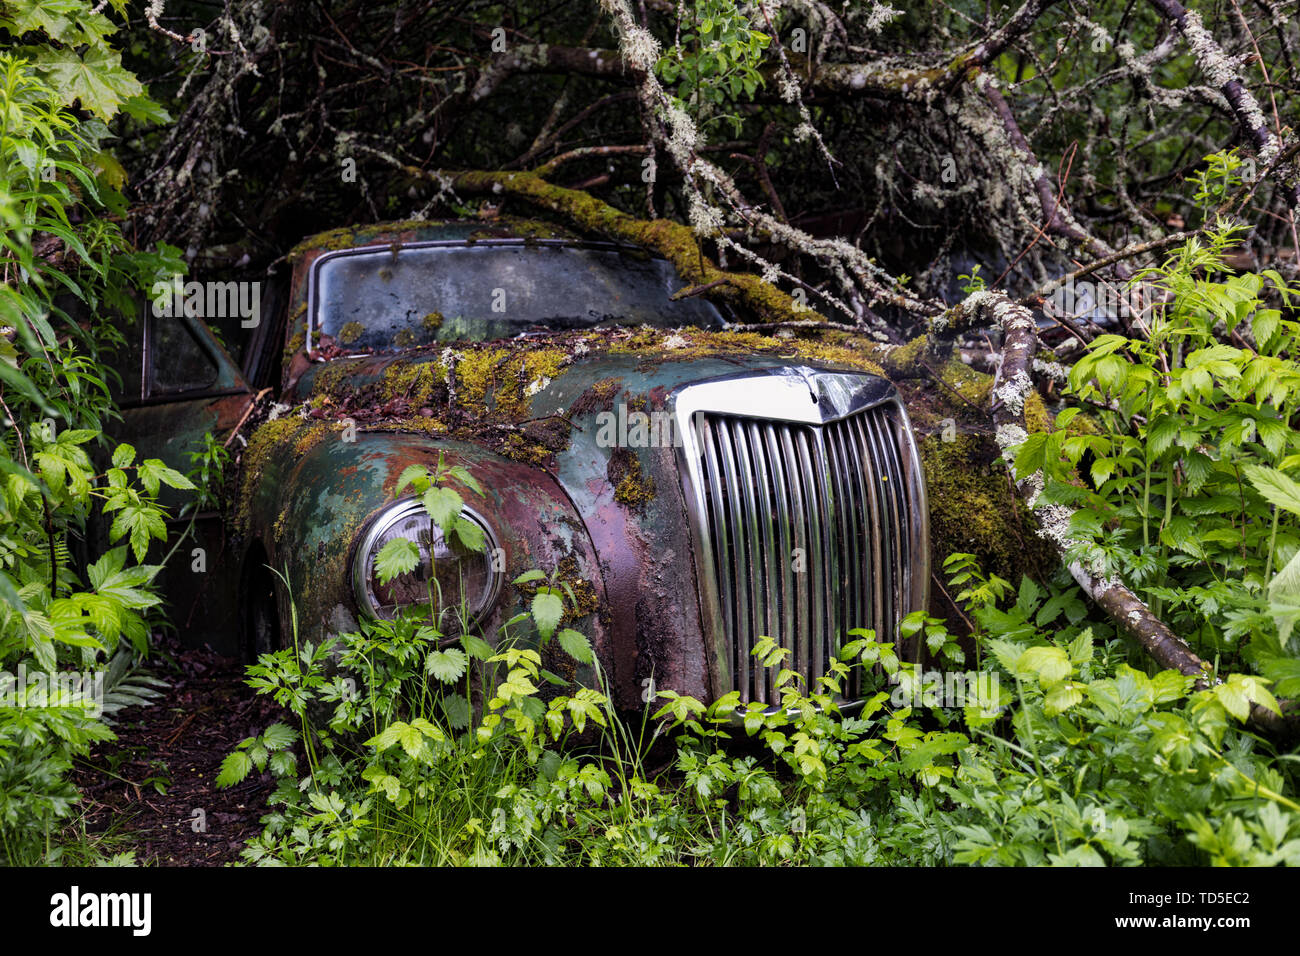 Bastnas Car Cemetery deep in the forests of the region of Varmland in Sweden, Scandinavia, Europe Stock Photo